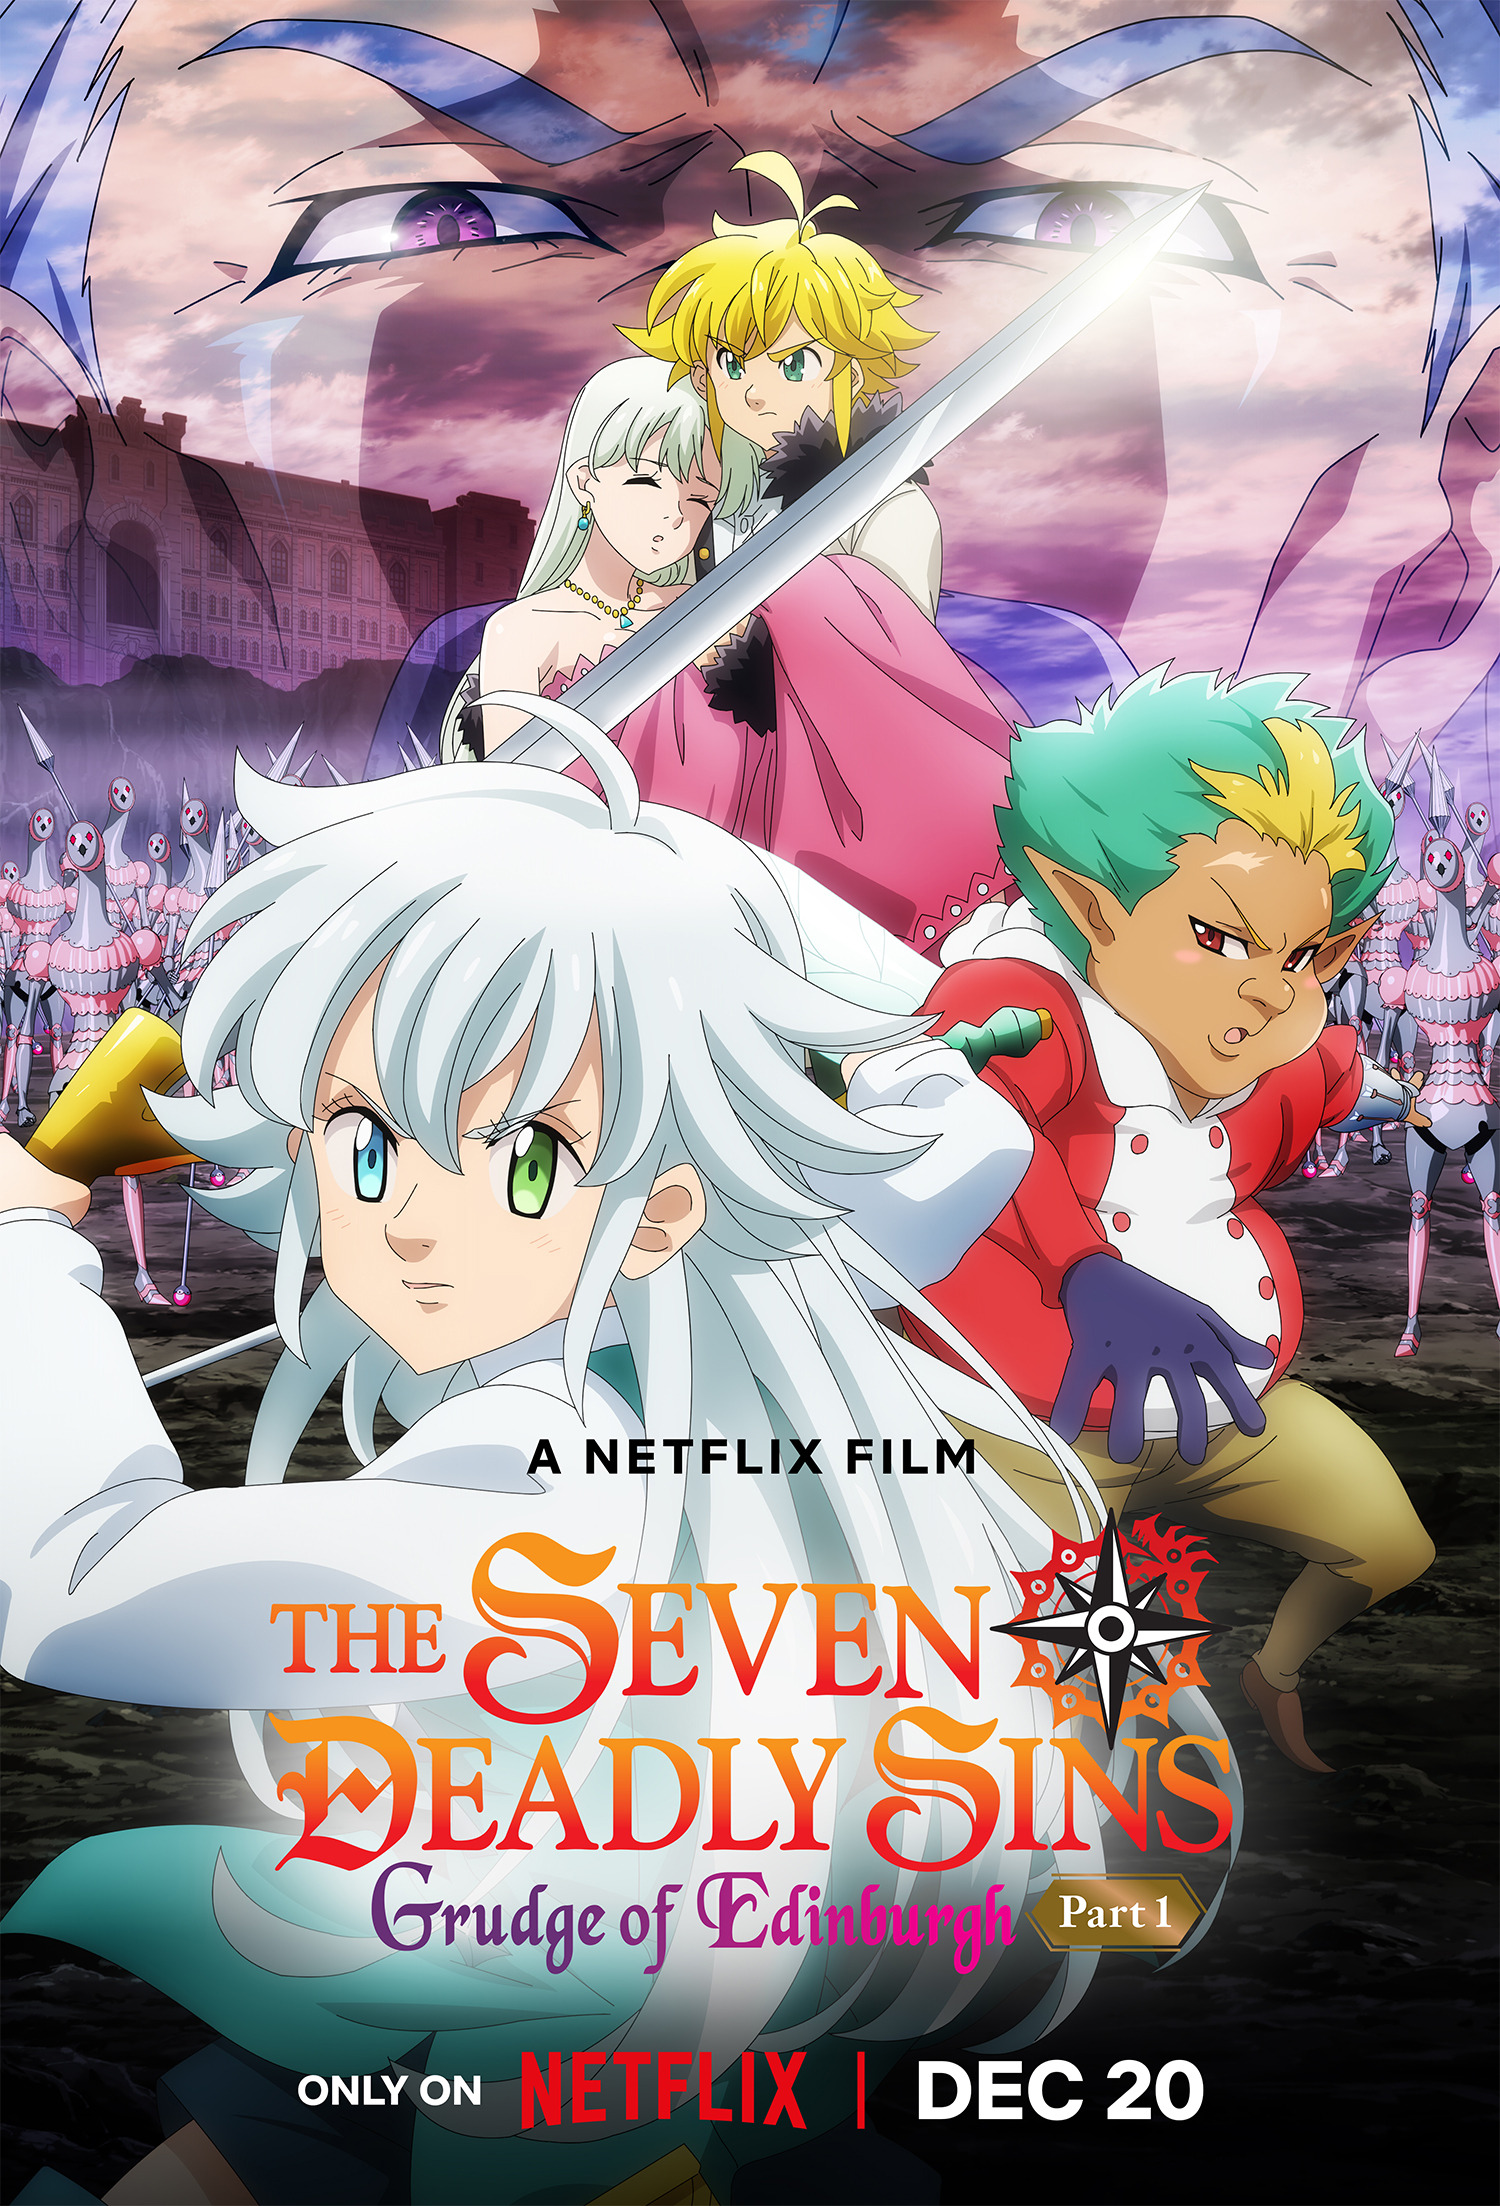 Mega Sized Movie Poster Image for The Seven Deadly Sins: Grudge of Edinburgh Part 1 (#2 of 2)